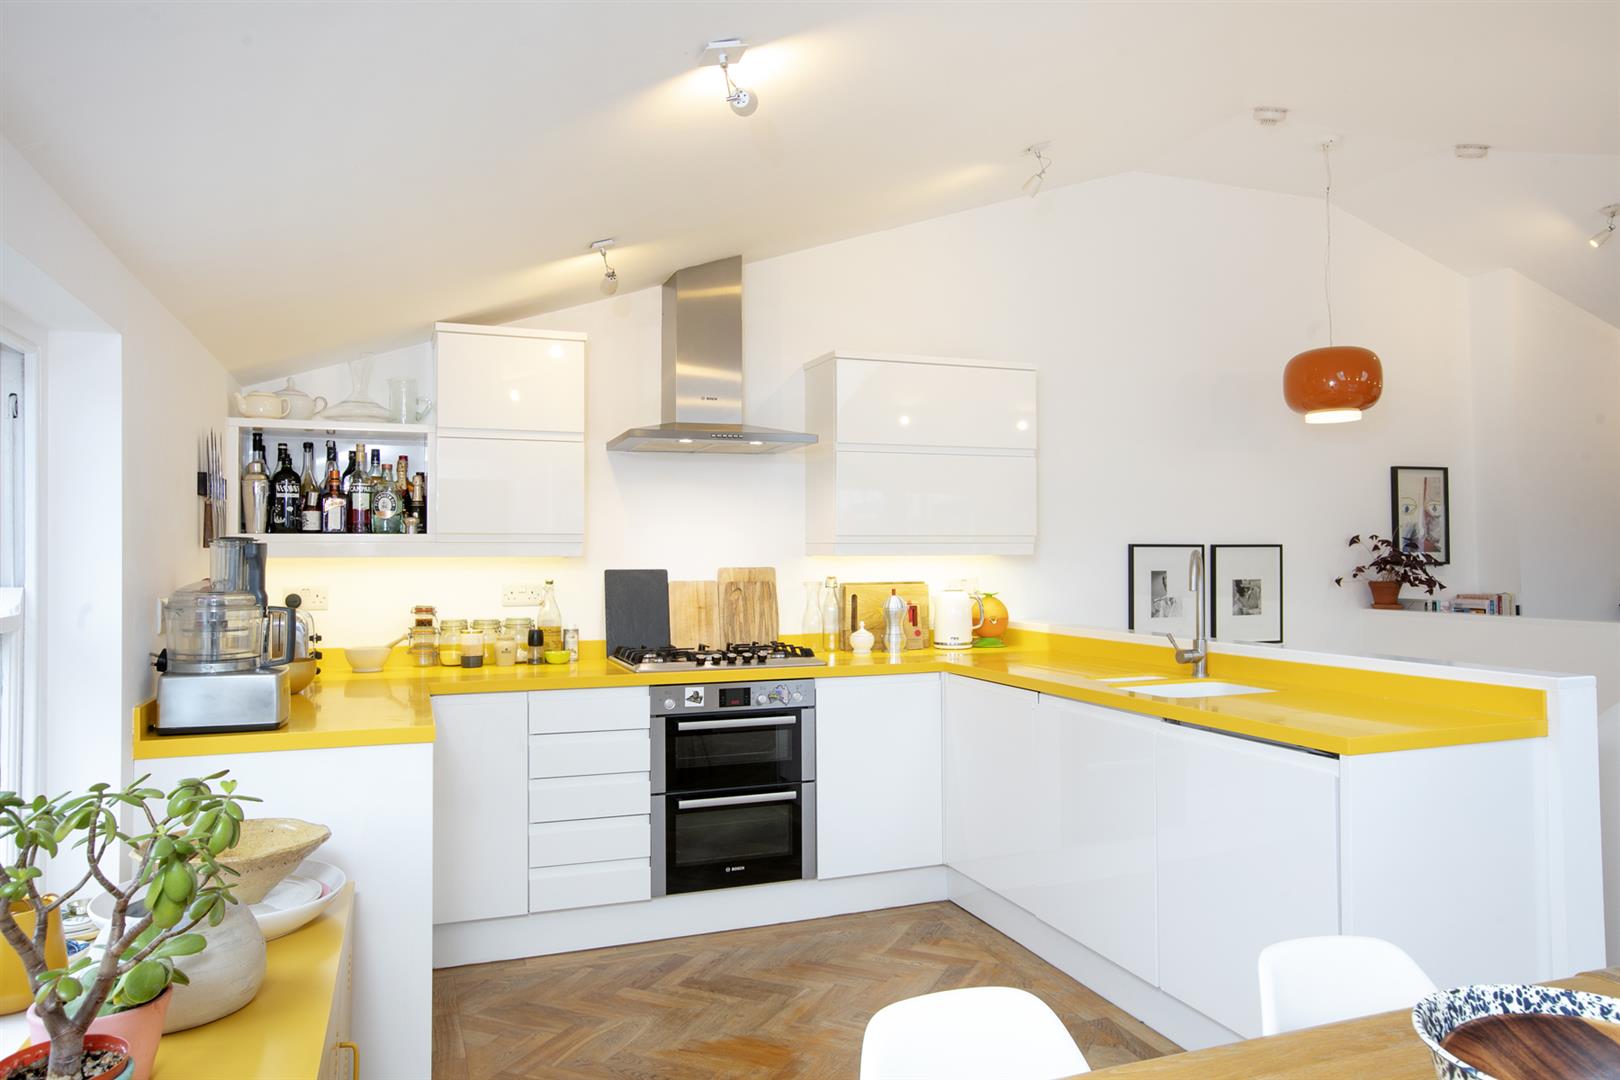 Flat - Conversion For Sale in Holly Grove, Peckham, SE15 893 view7